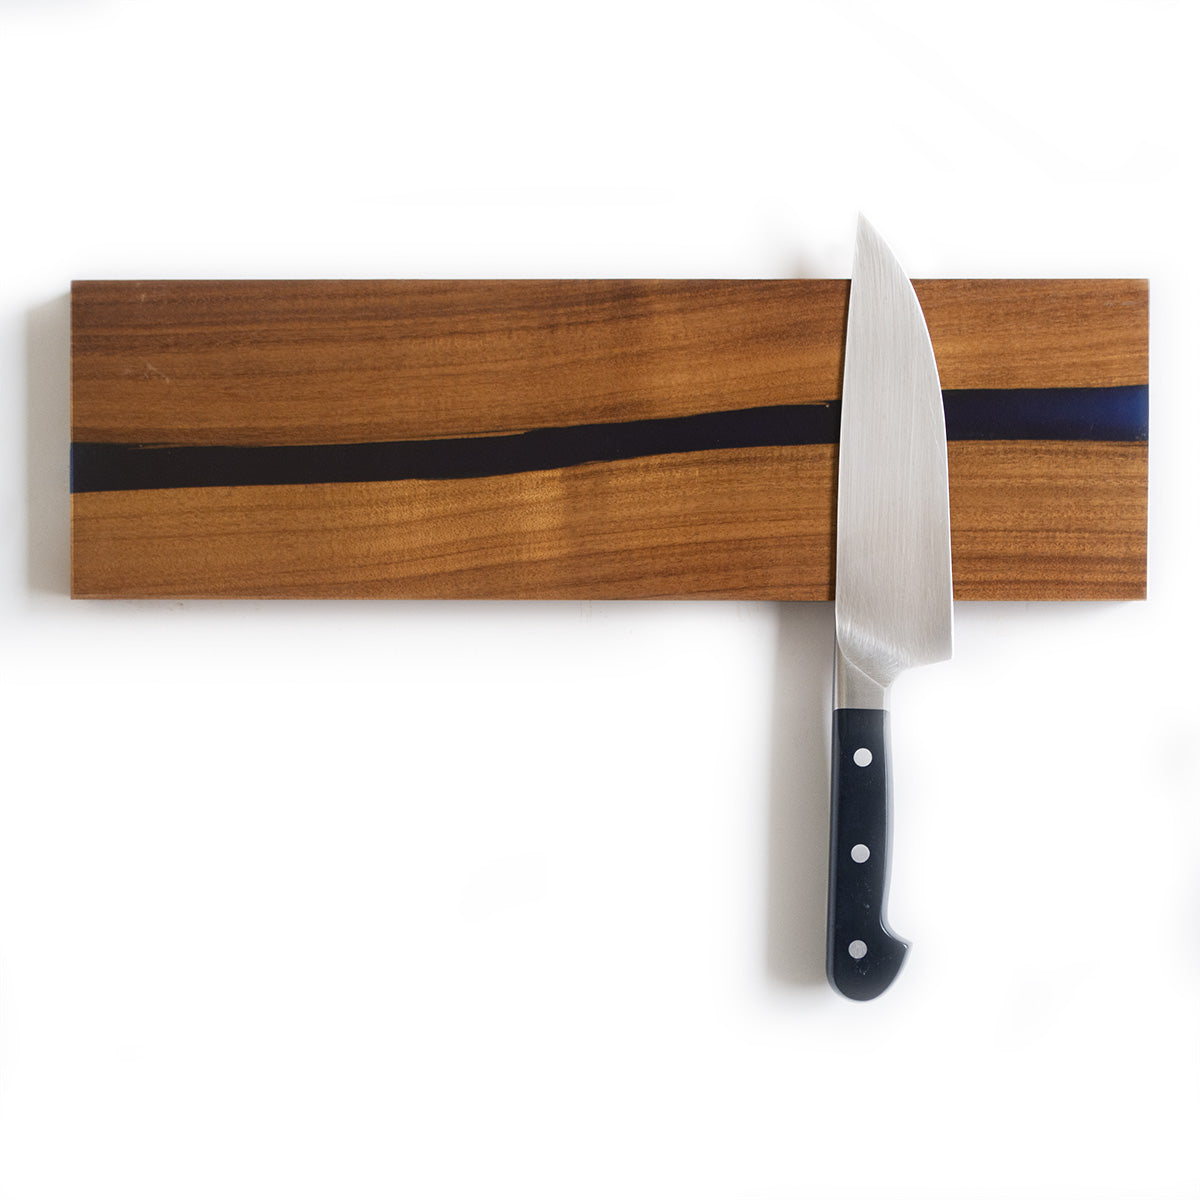 magnetic knife holder made with sweet acacia hardwood and an epoxy resin river, holding a chefs knife